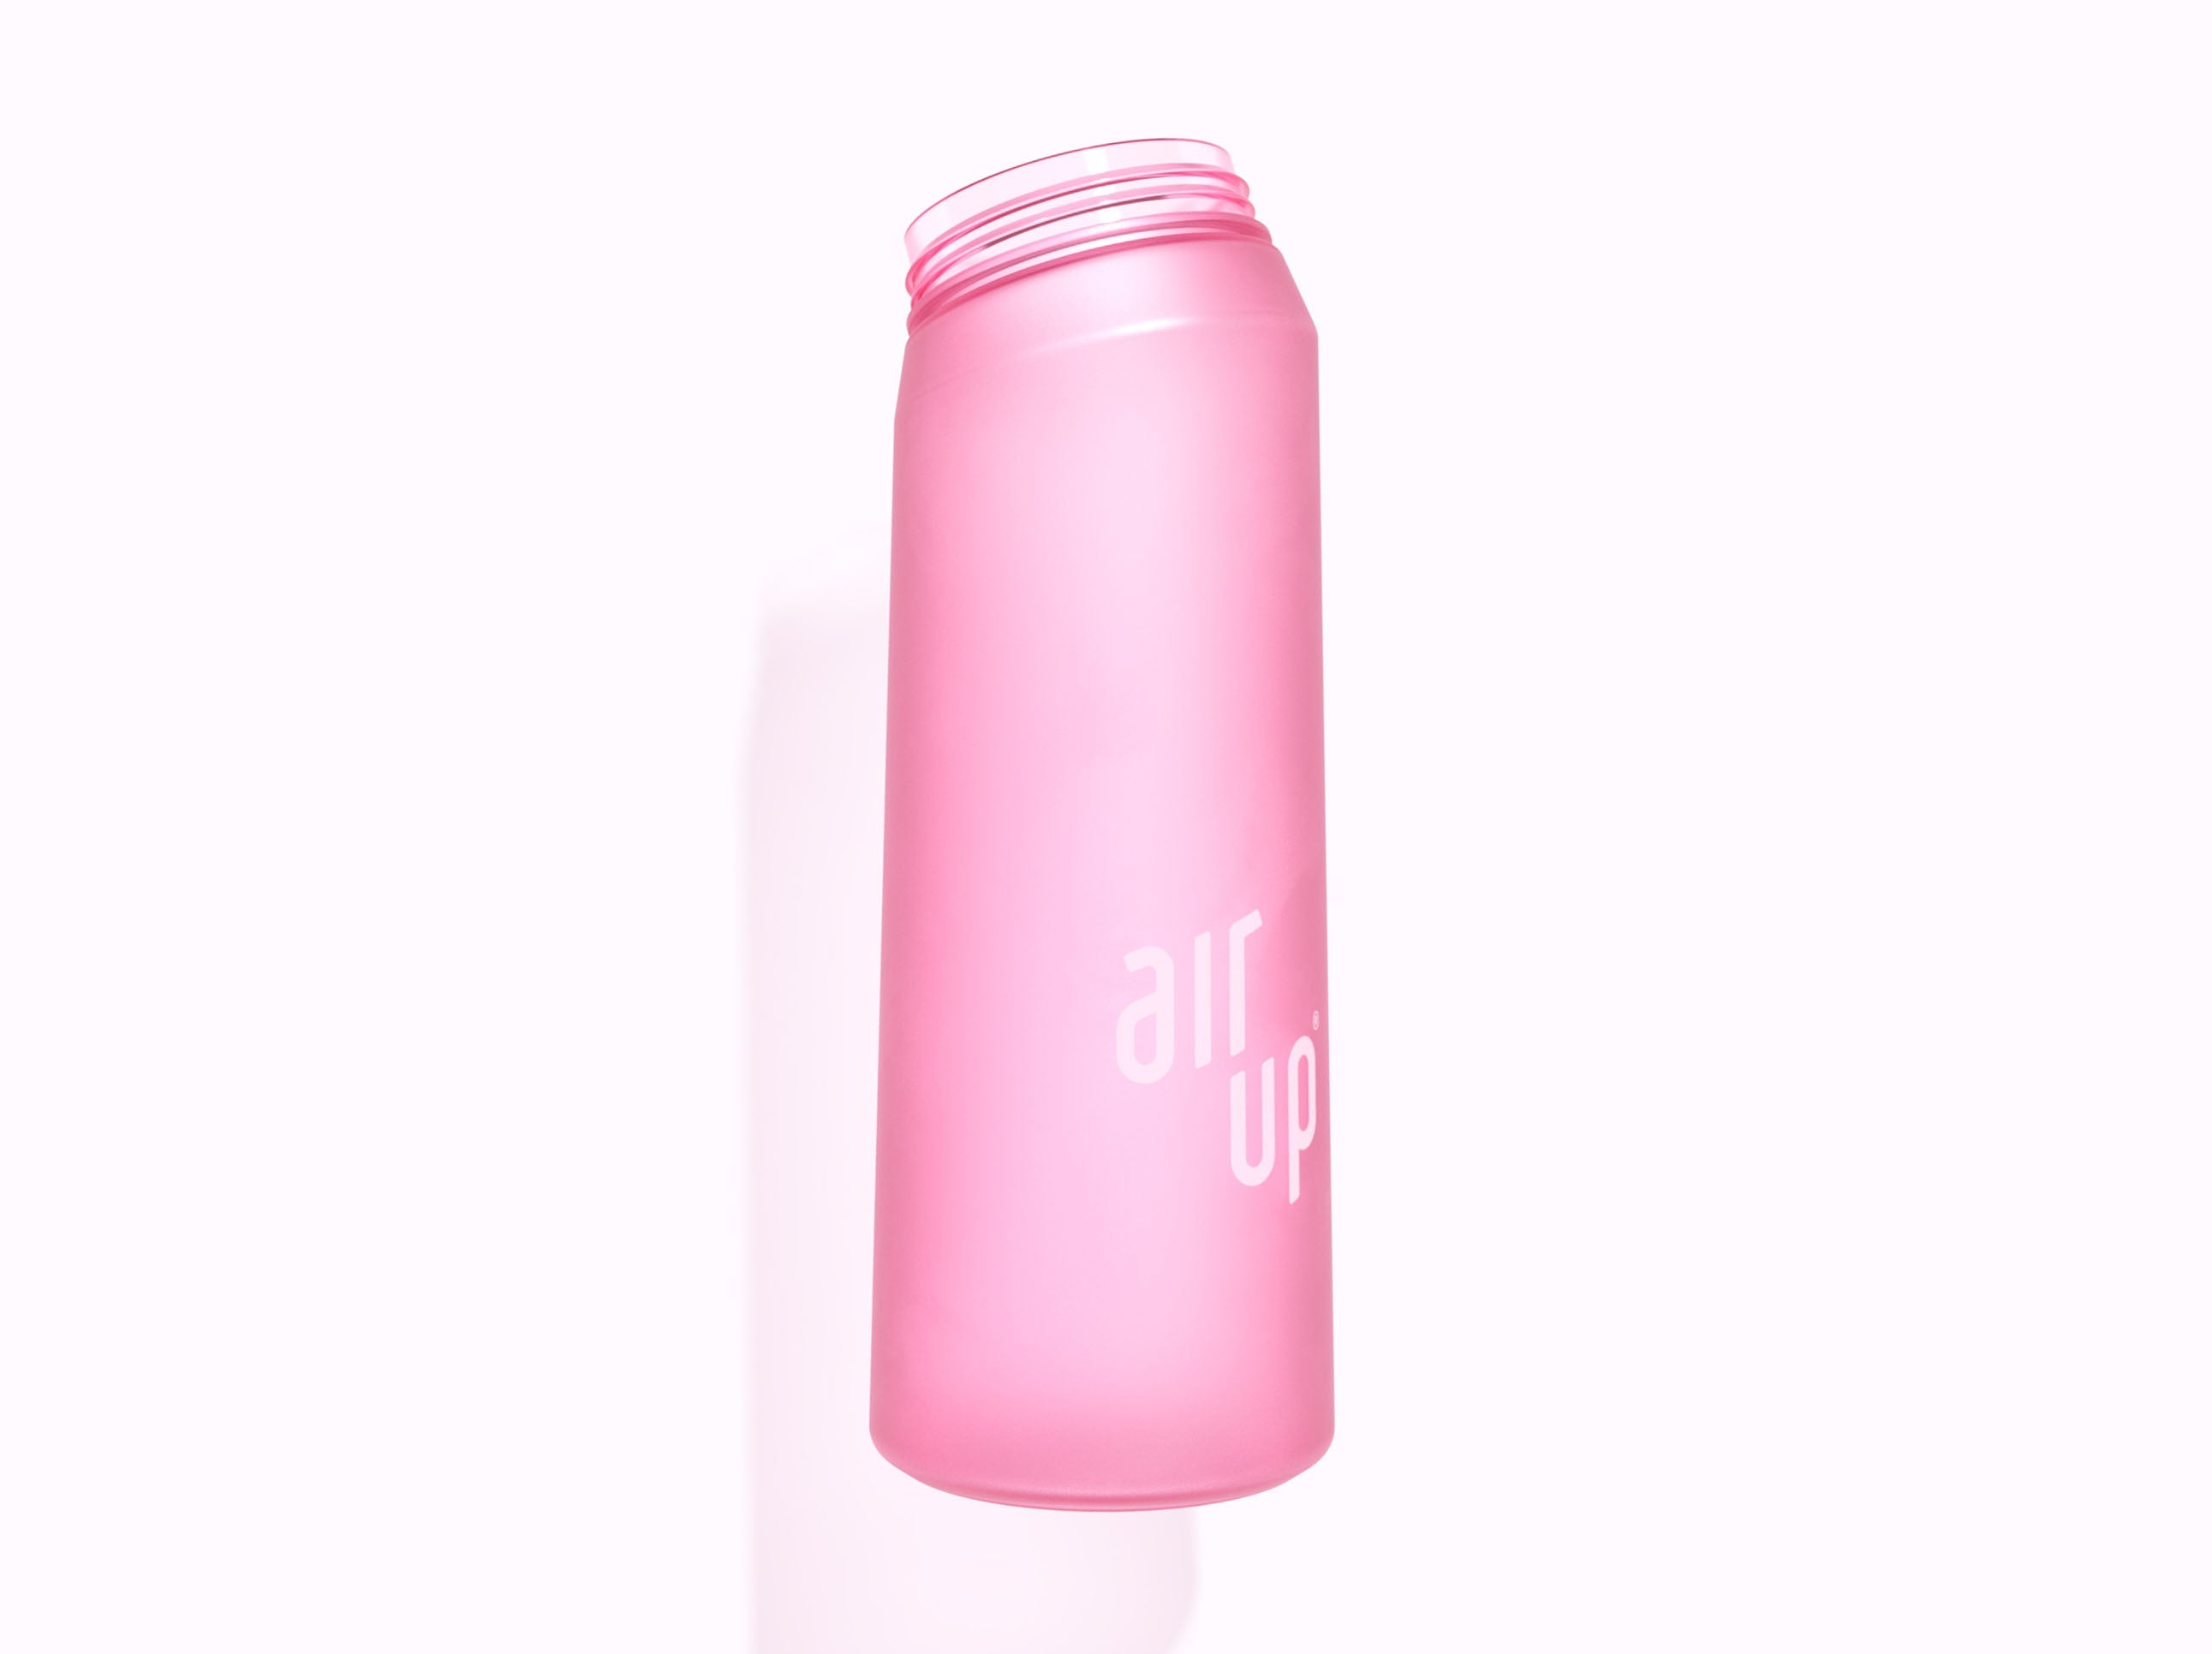 https://cdn.shopify.com/s/files/1/0595/3909/5605/products/AirUP-SparePart-HotPink_Body.jpg?v=1674581681